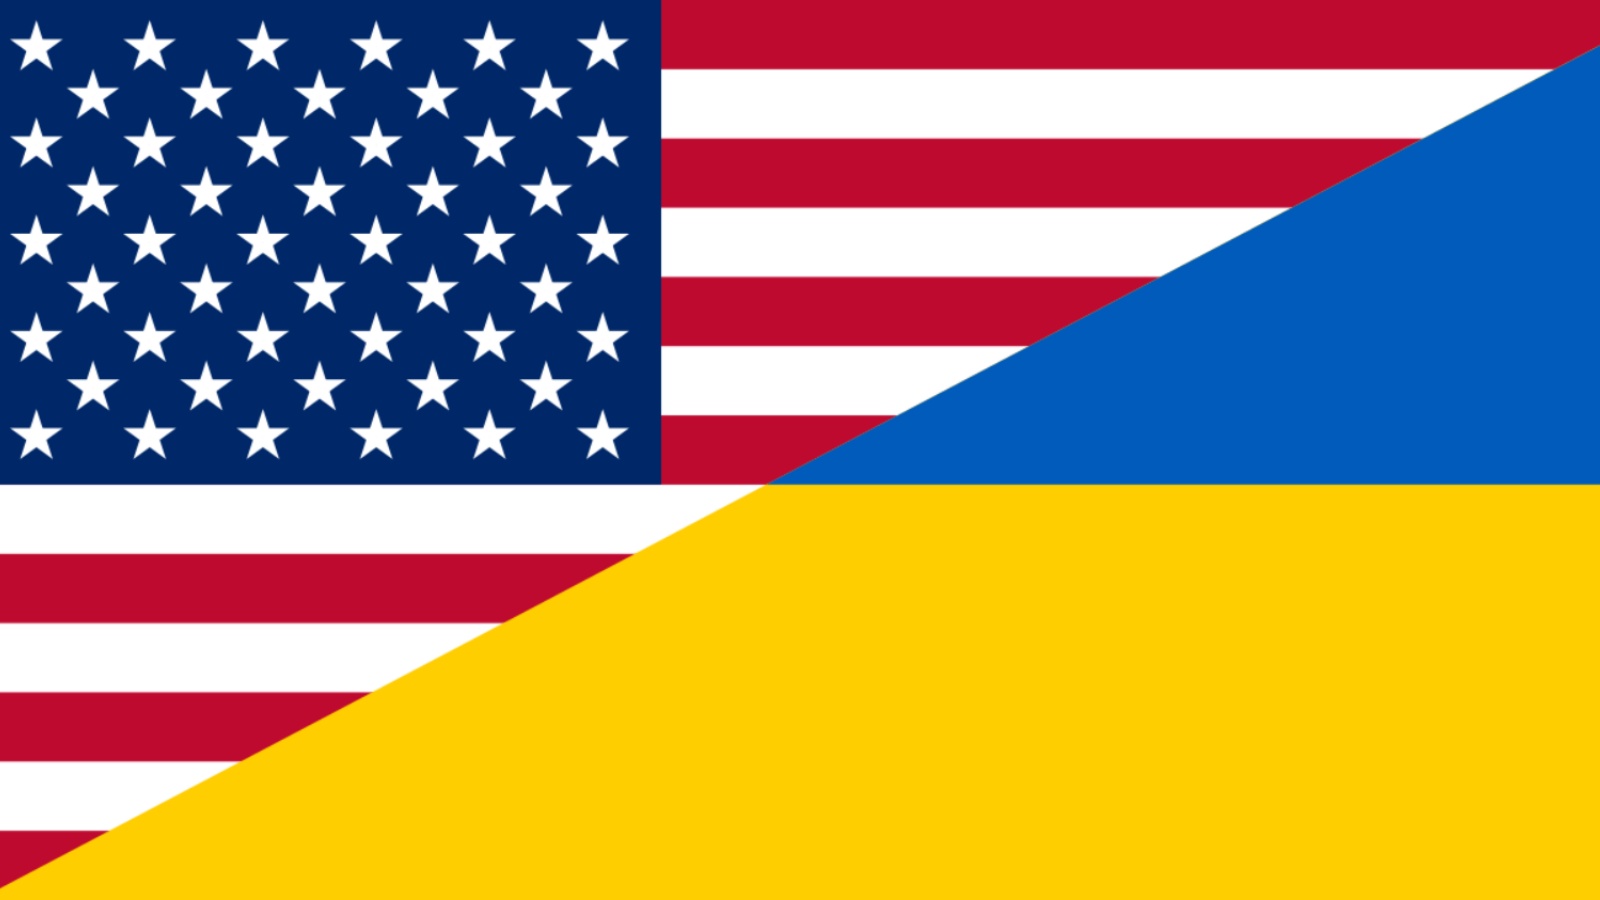 The USA is Preparing a New Military Aid Package for Ukraine